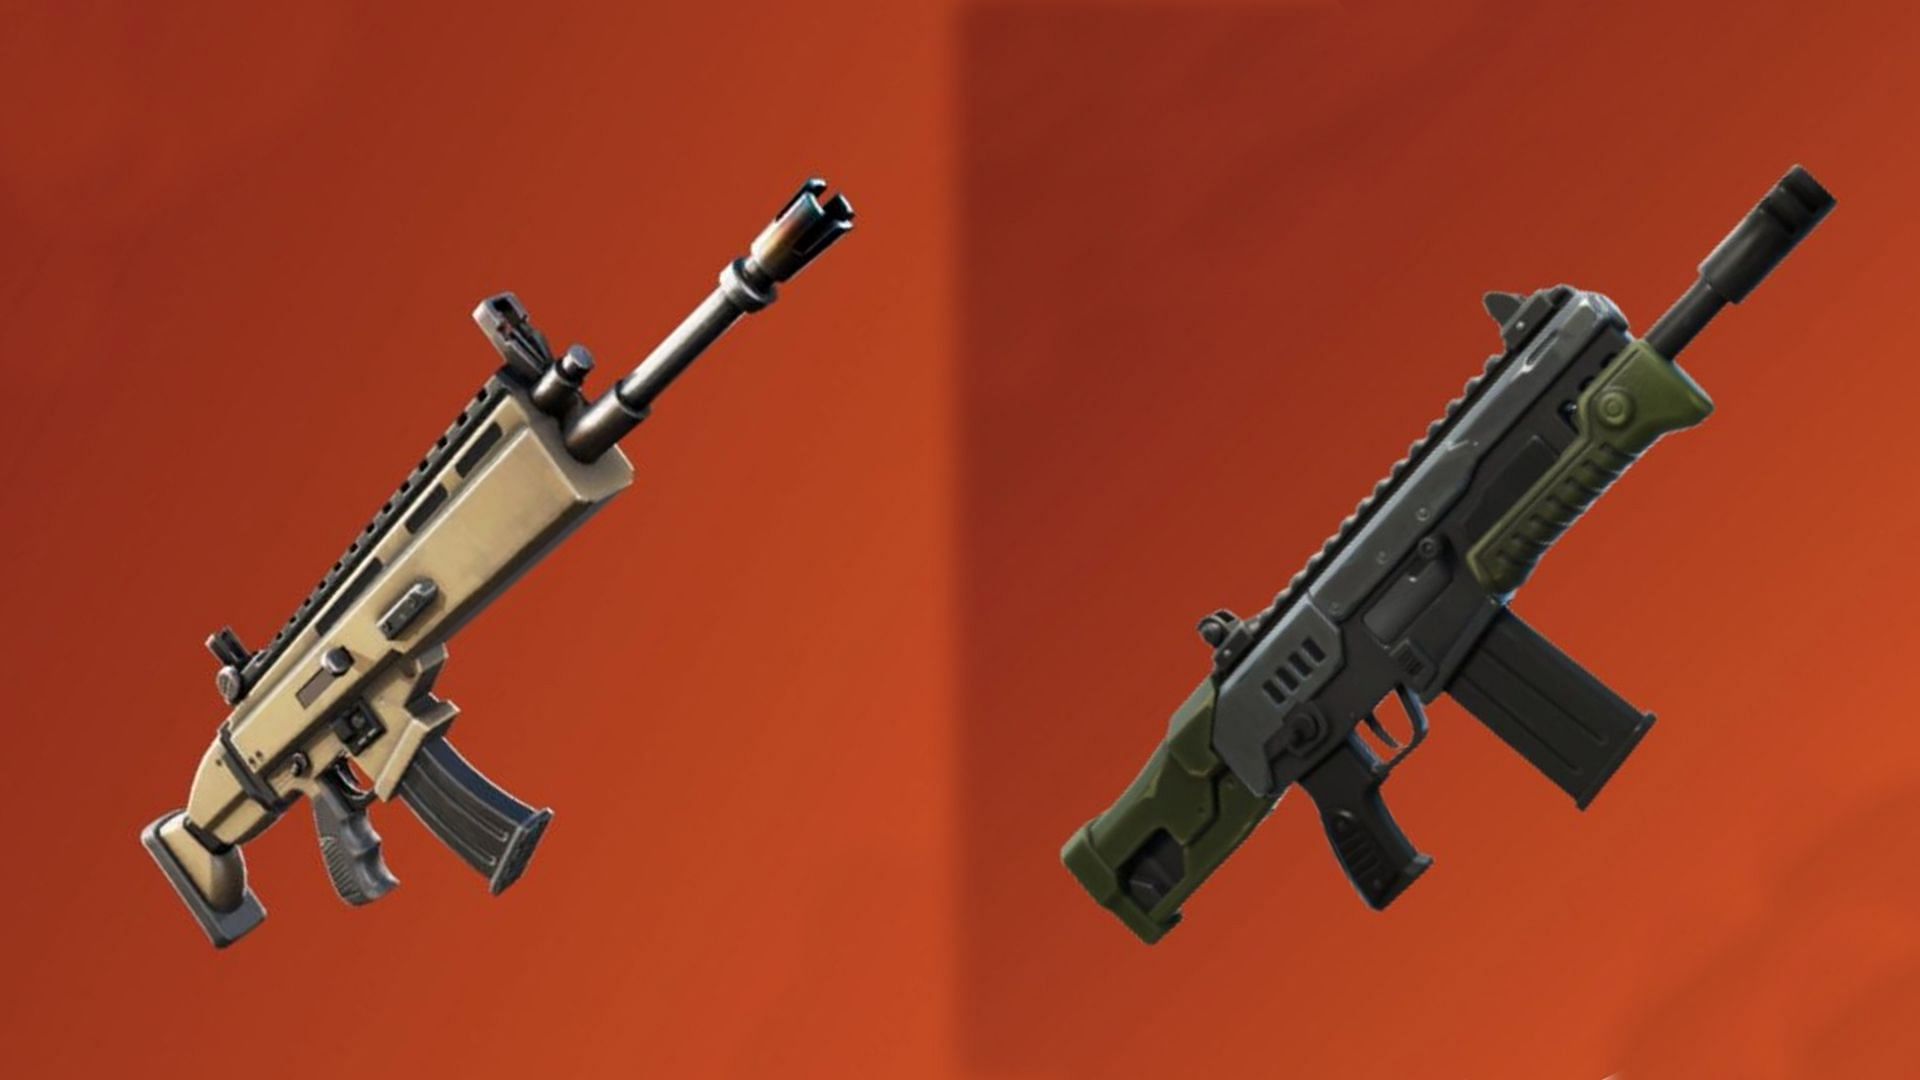 Comparing the iconic Fortnite SCAR to the Hammer Assault Rifle. (Image via Sportskeeda)